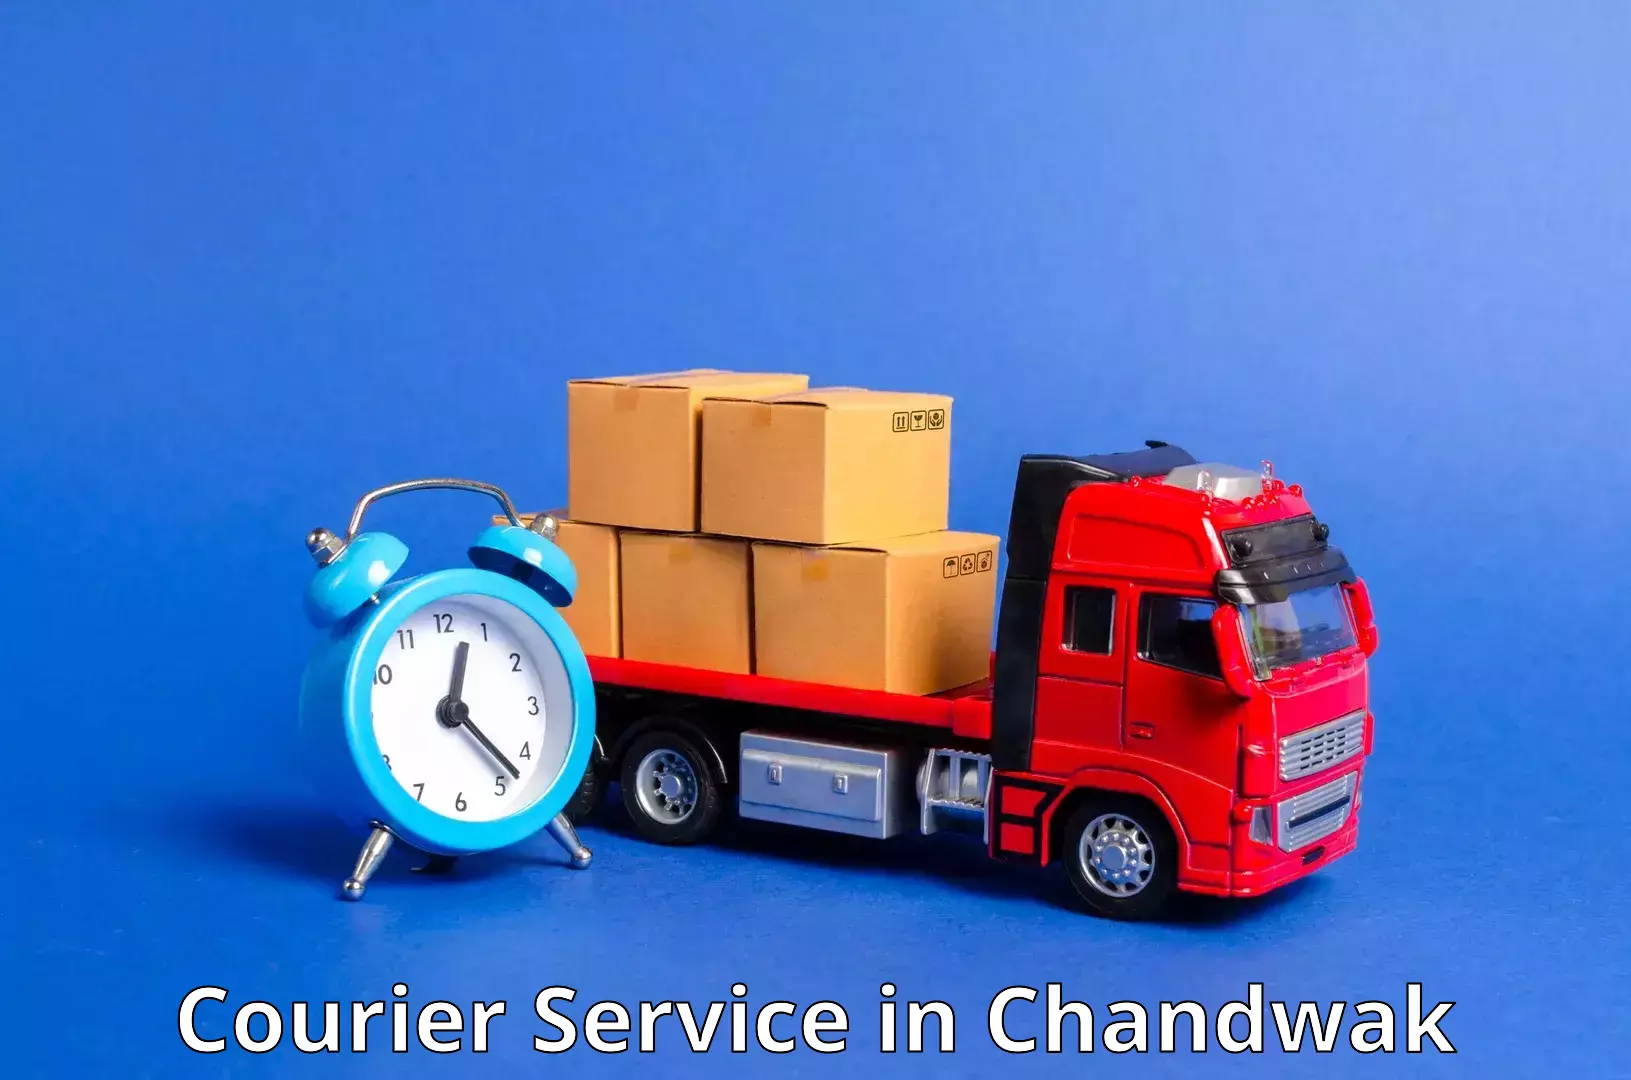 On-call courier service in Chandwak